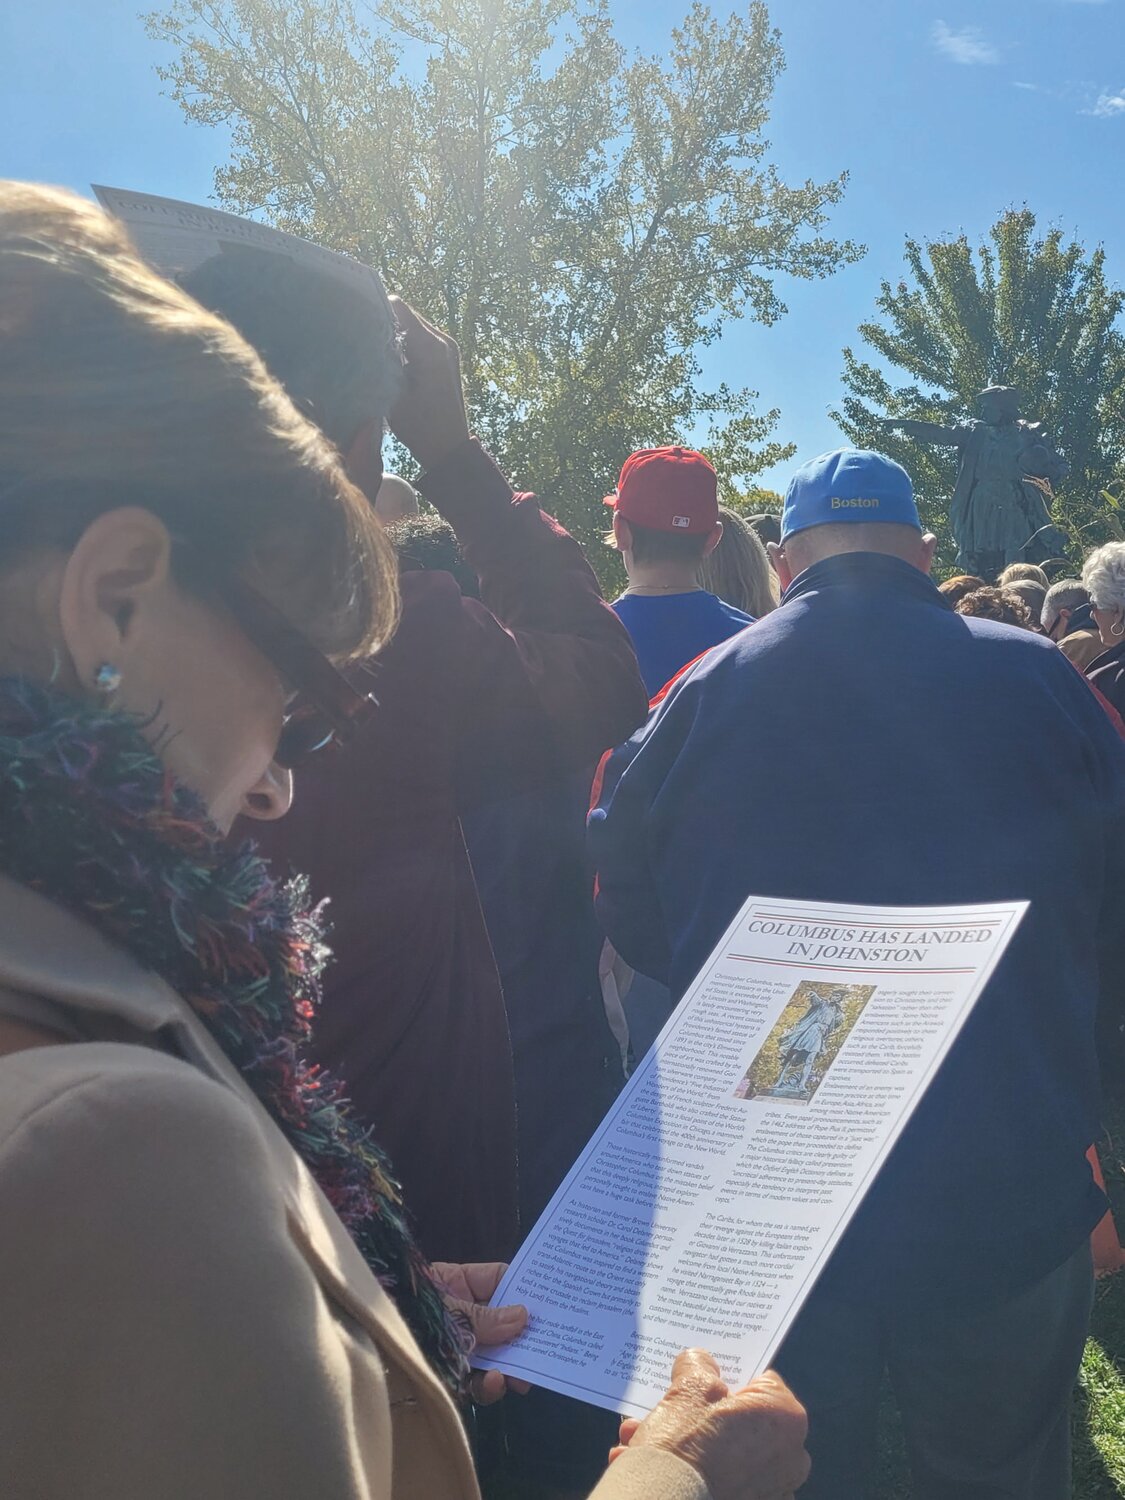 CONTEXT: Dr. Patrick T. Conley, Historian Laureate of Rhode Island, handed out a historical context titled “Columbus has landed in Johnston,” to the crowd before his address. One of the attendees read the handout during the ceremony.